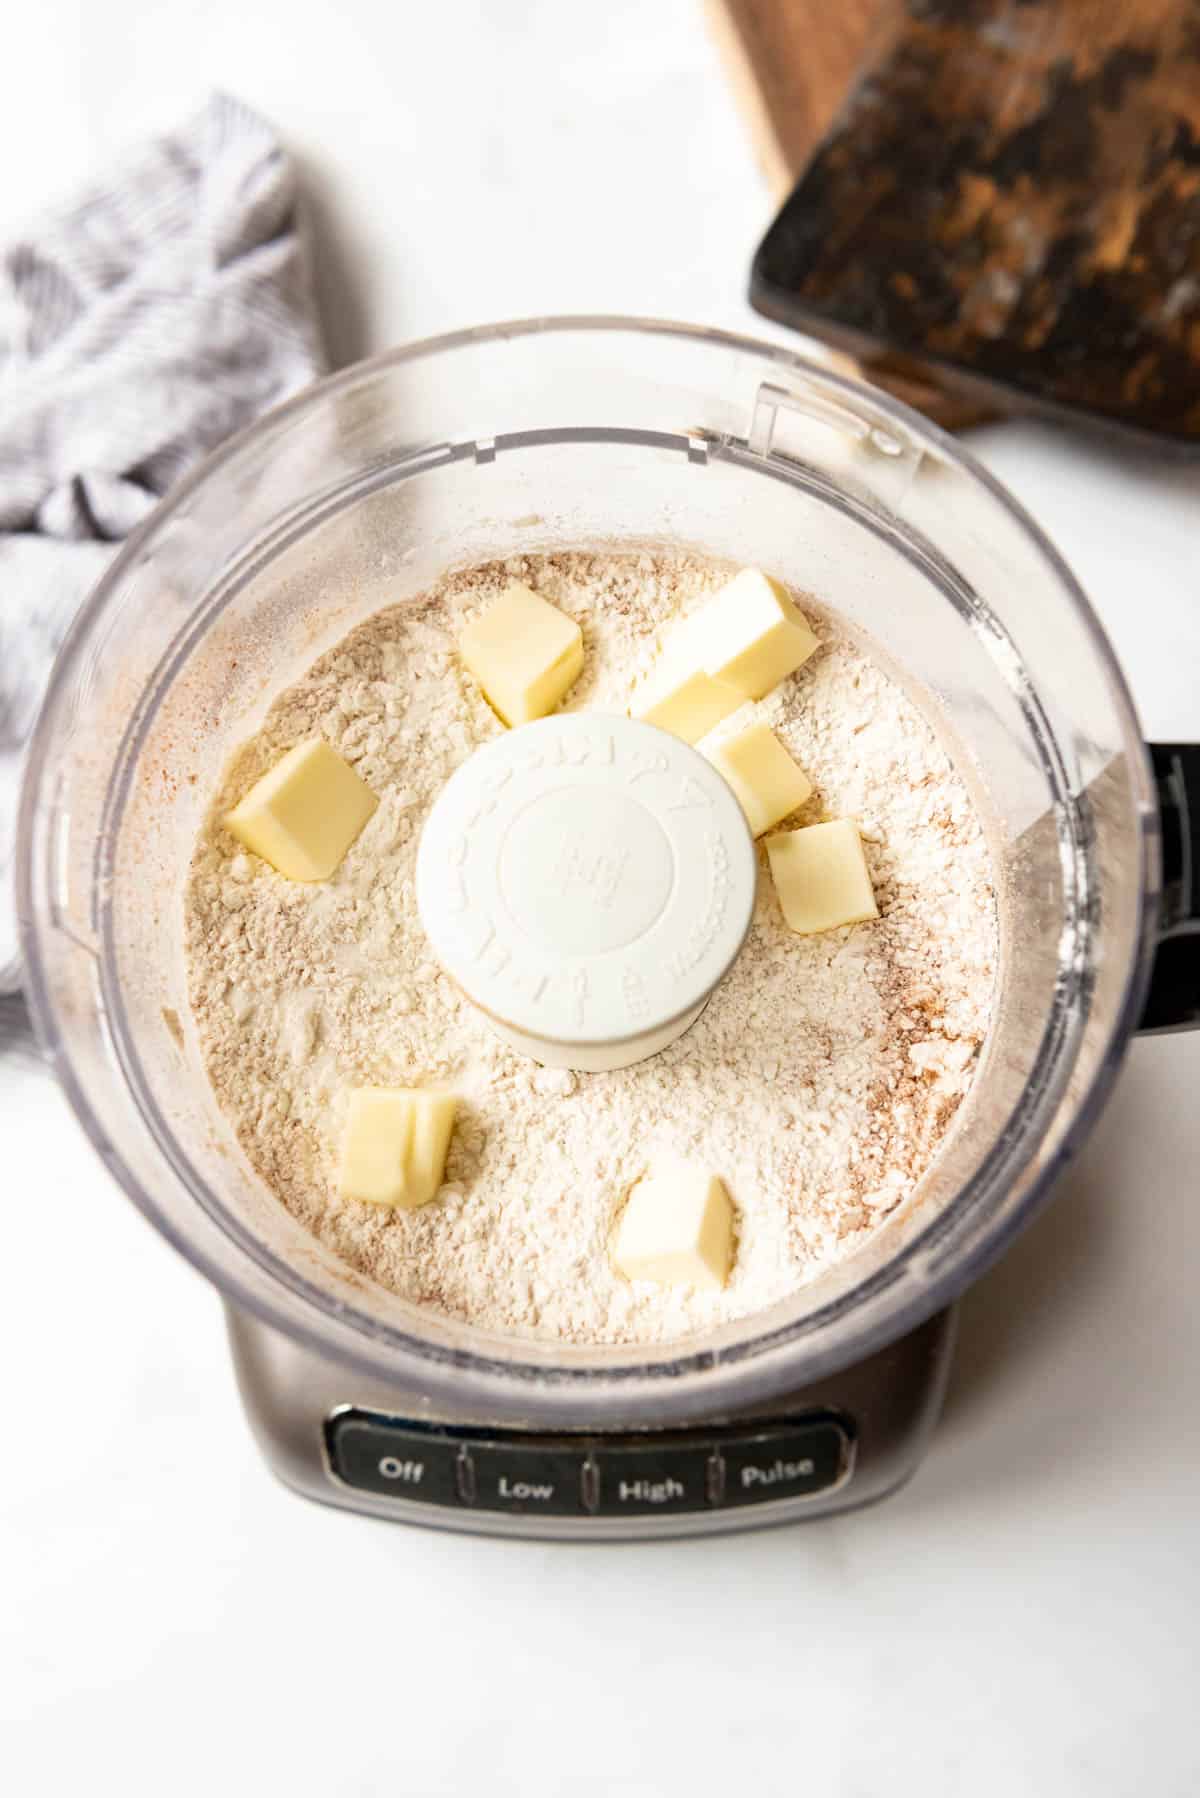 Combining butter and dry ingredients in a food processor to make cannoli dough.